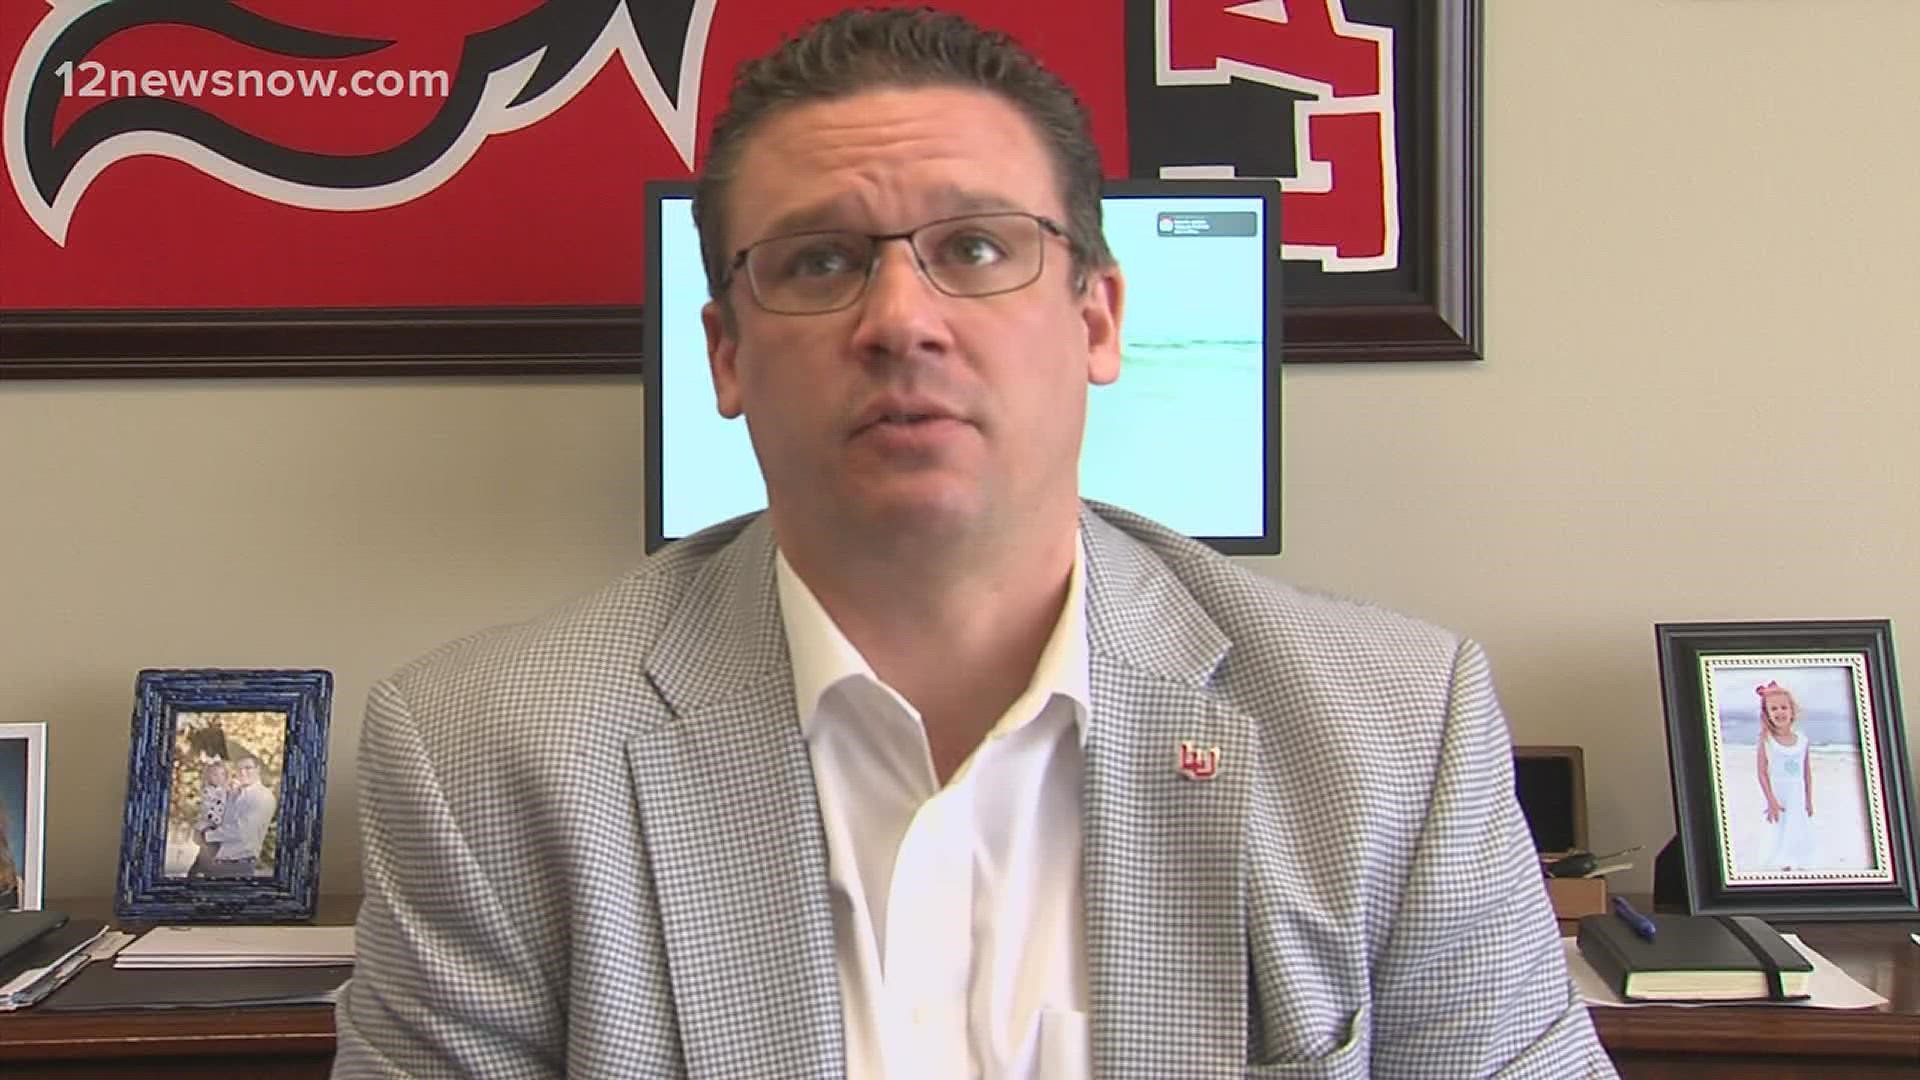 Lamar AD says they didn't want to risk the safety of student athletes